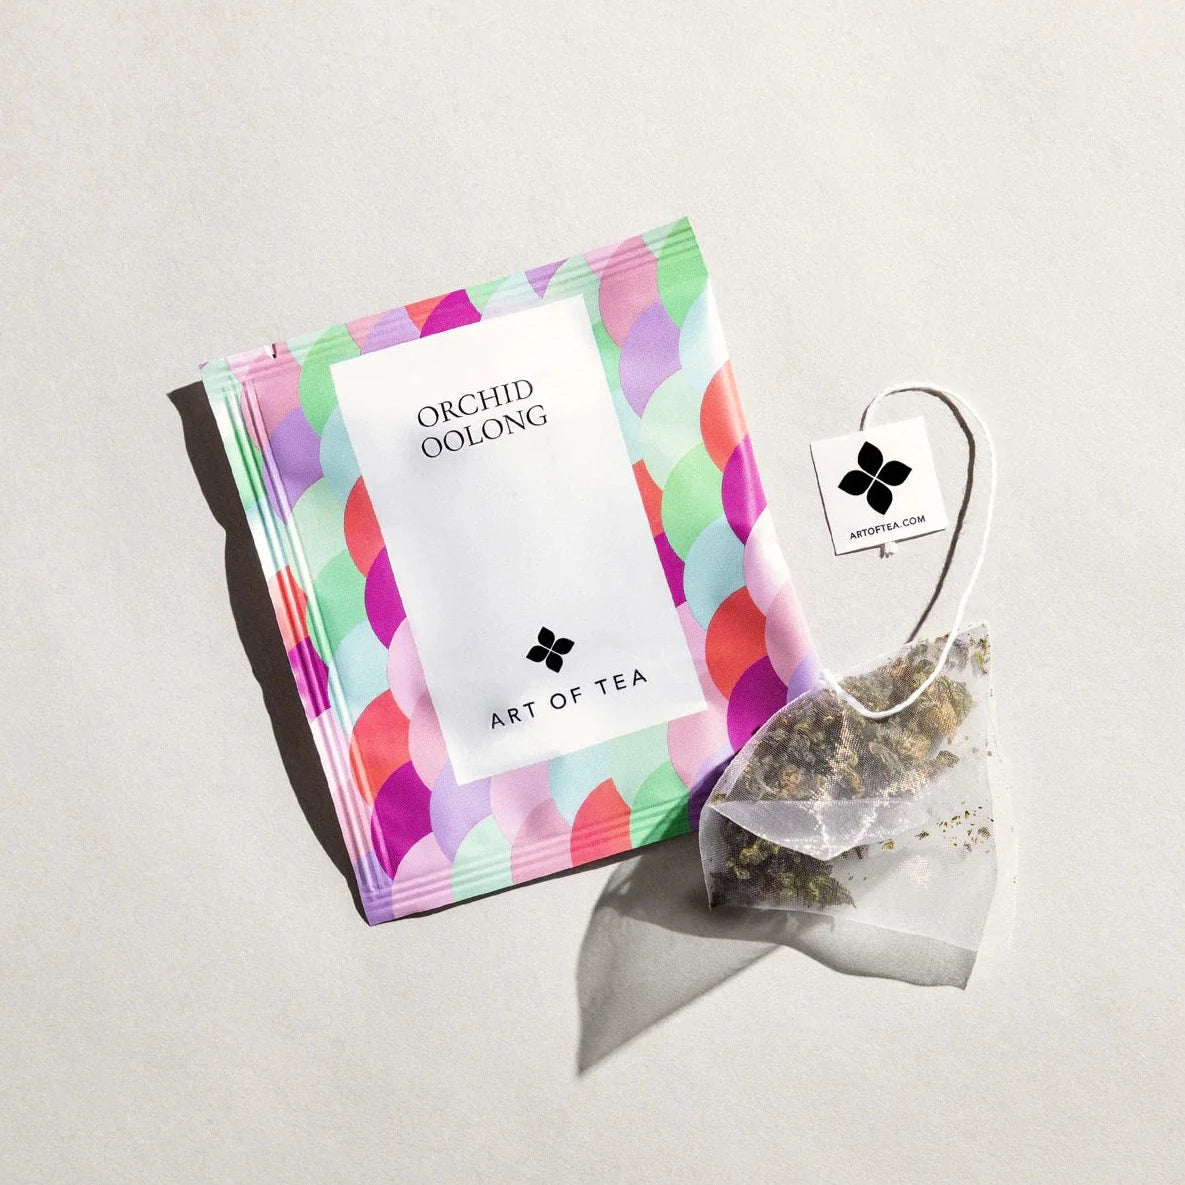 pastel colored tea sachet with. varies hues of purple, blue & green. next to it is a tea bag